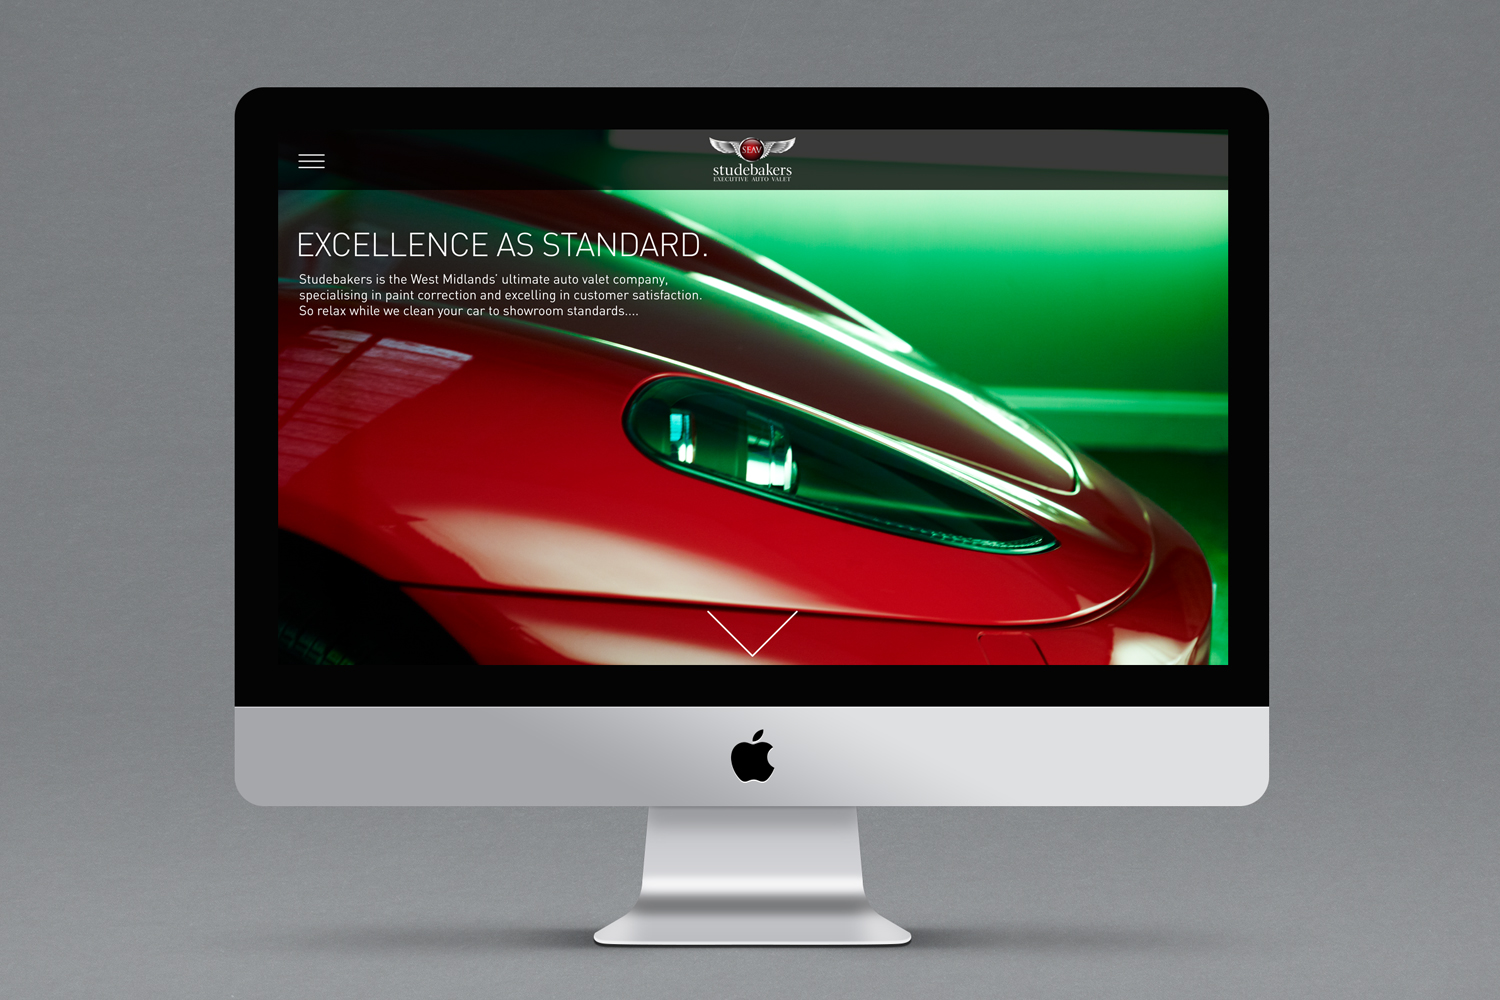 studebakers website home page on imac